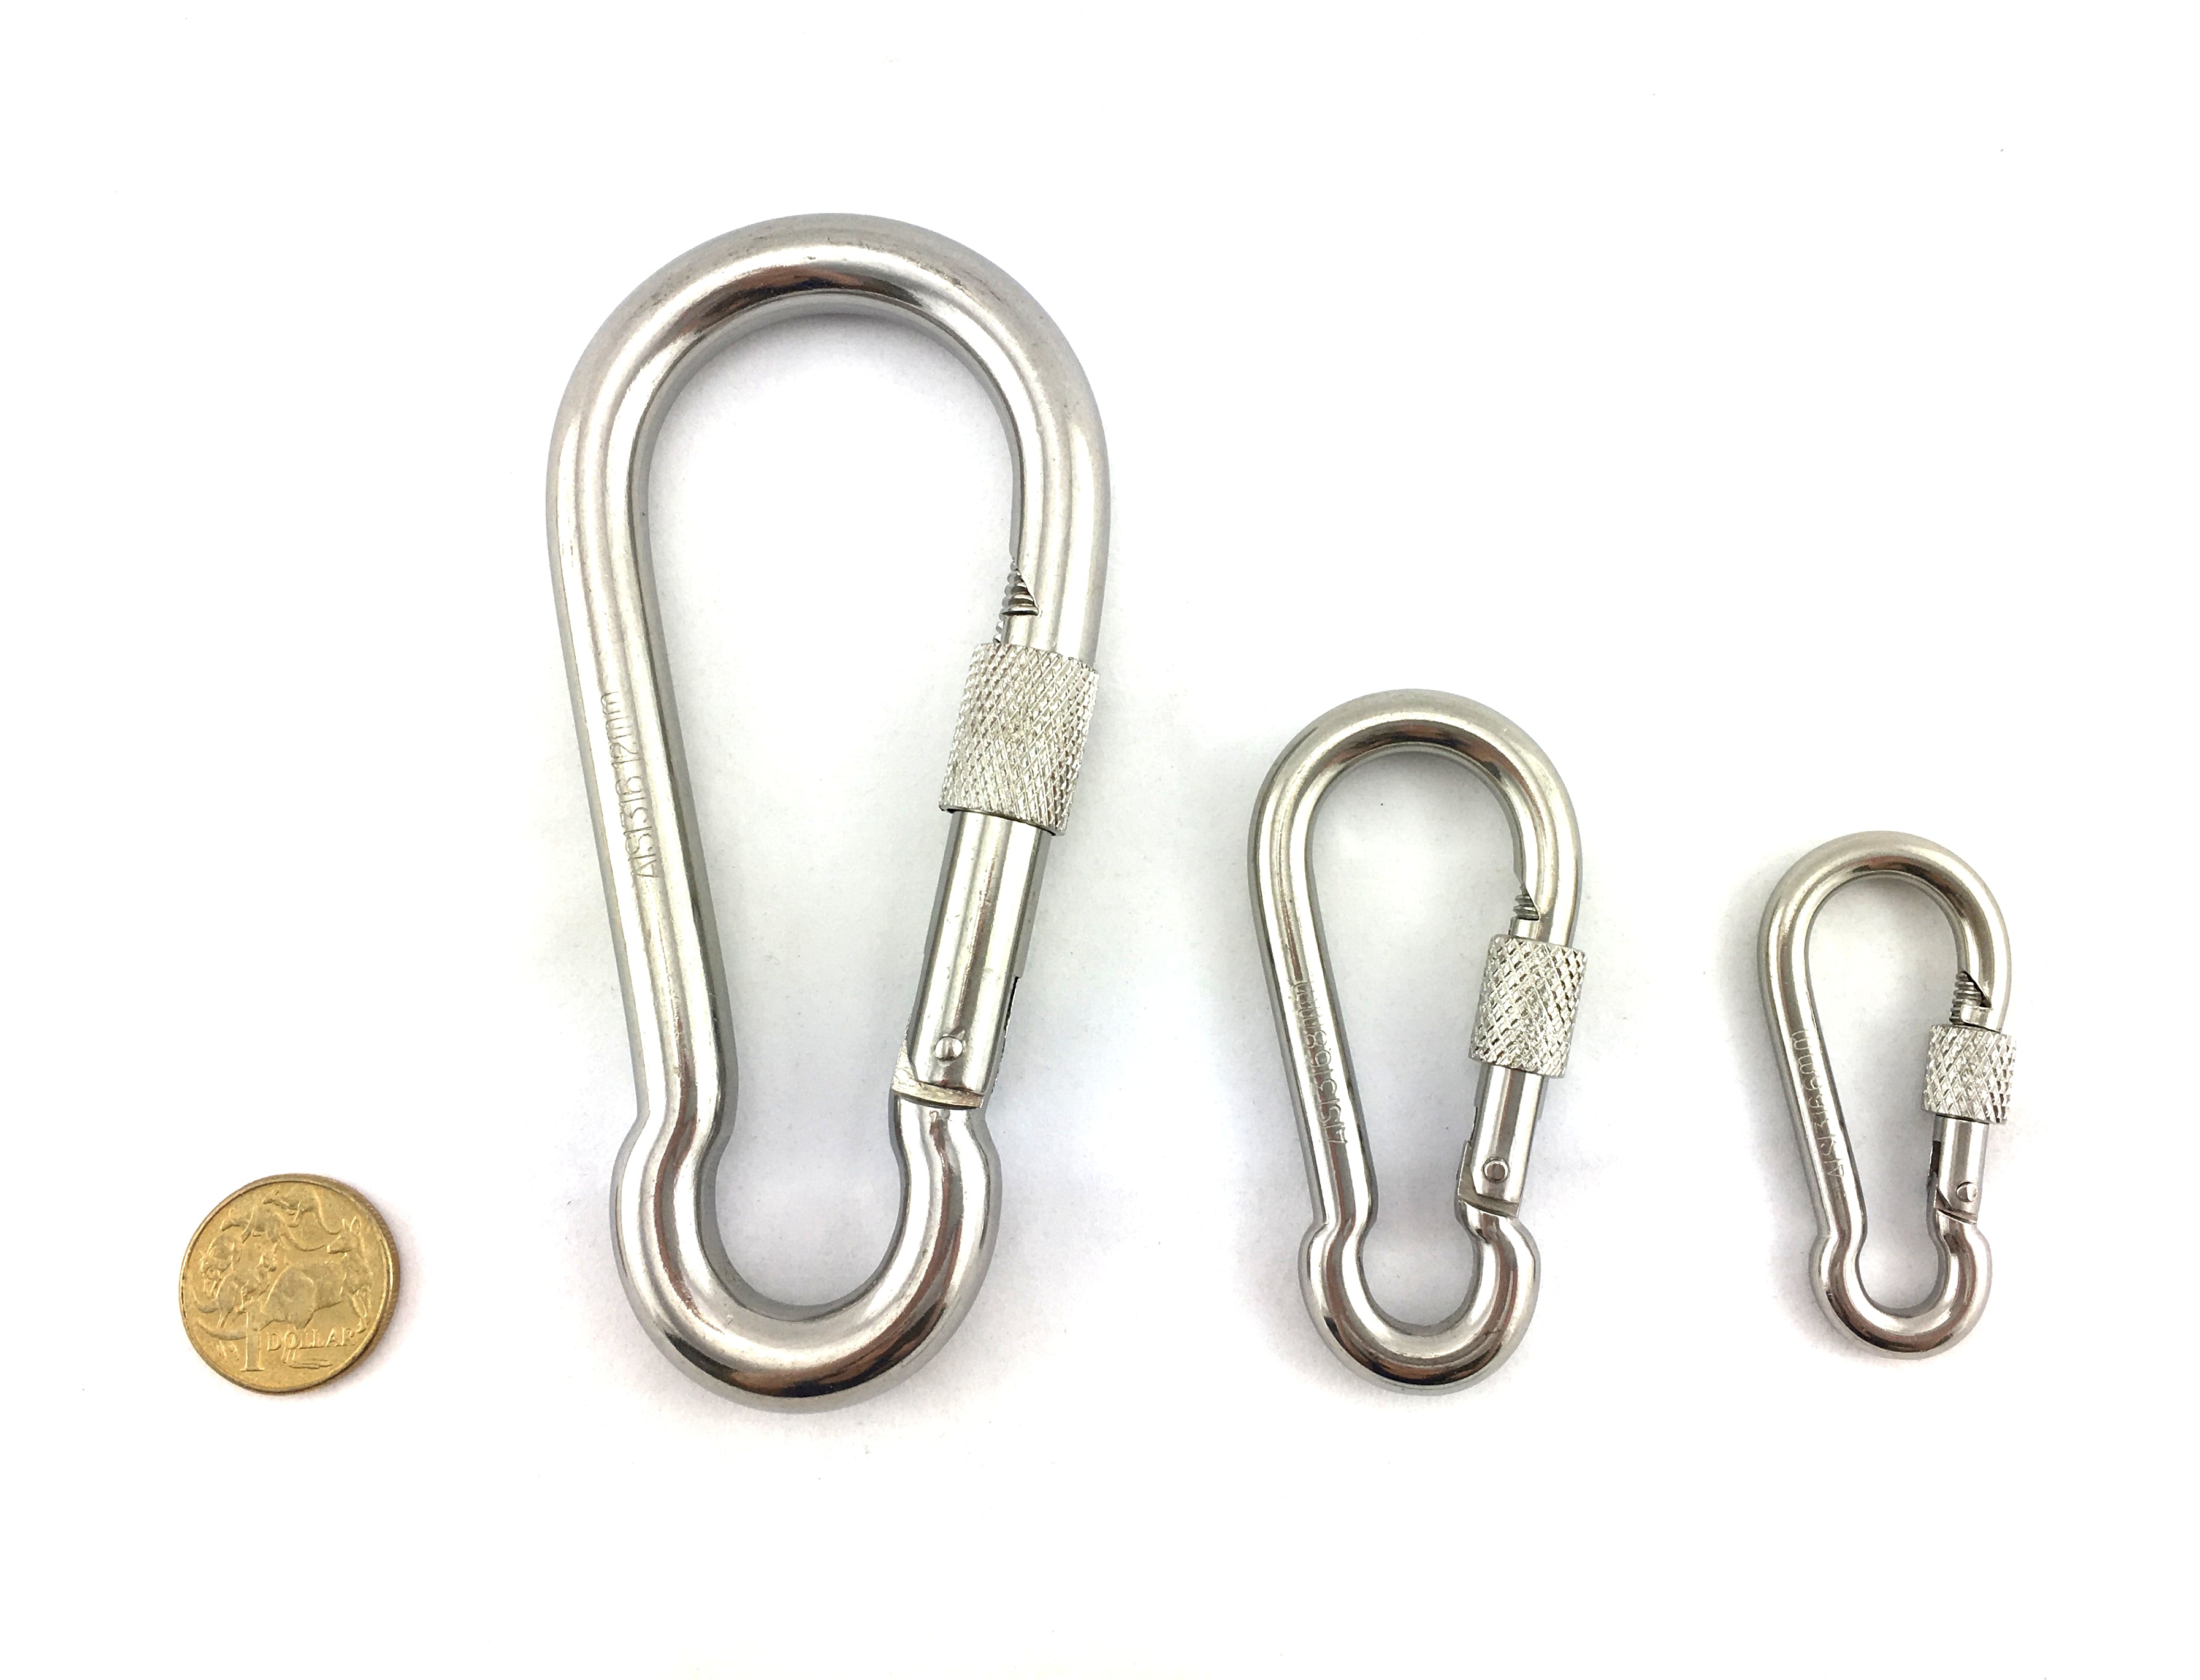 Locking Snap Hook with screw gate, Stainless Steel. Melbourne, Australia.